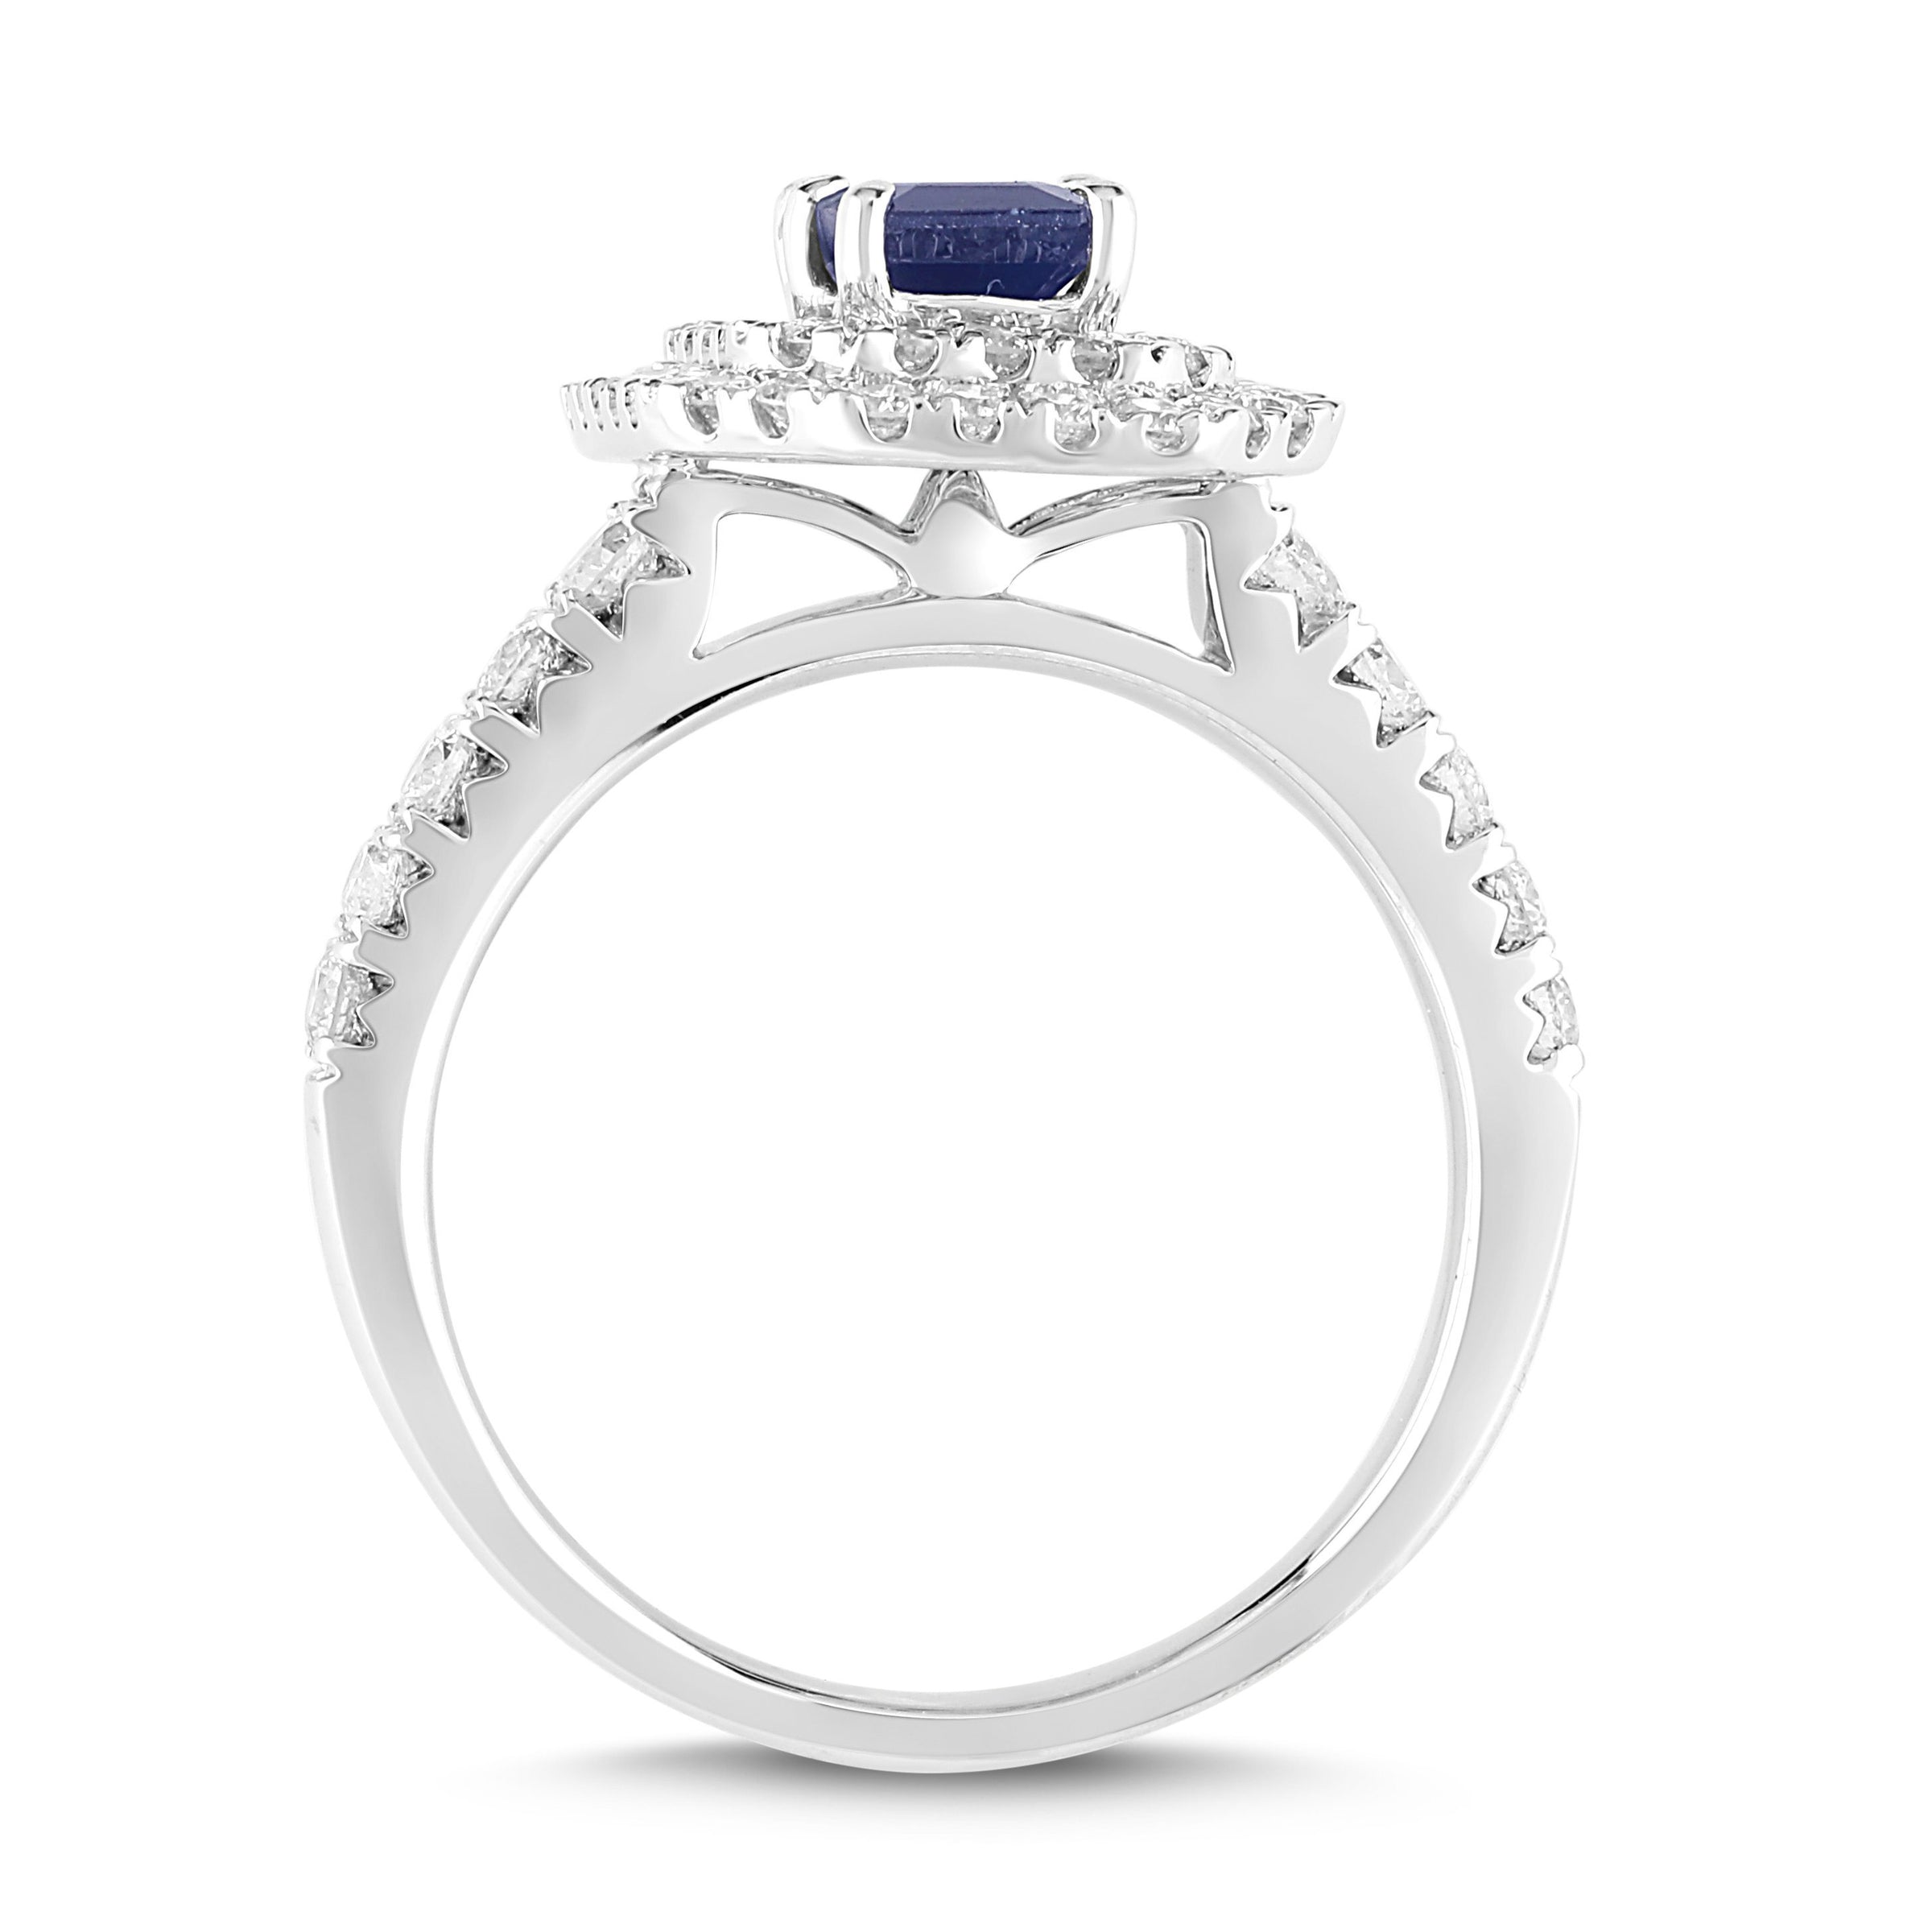 18ct White Gold Sapphire Ring with 0.80ct of Diamonds Rings Bevilles 